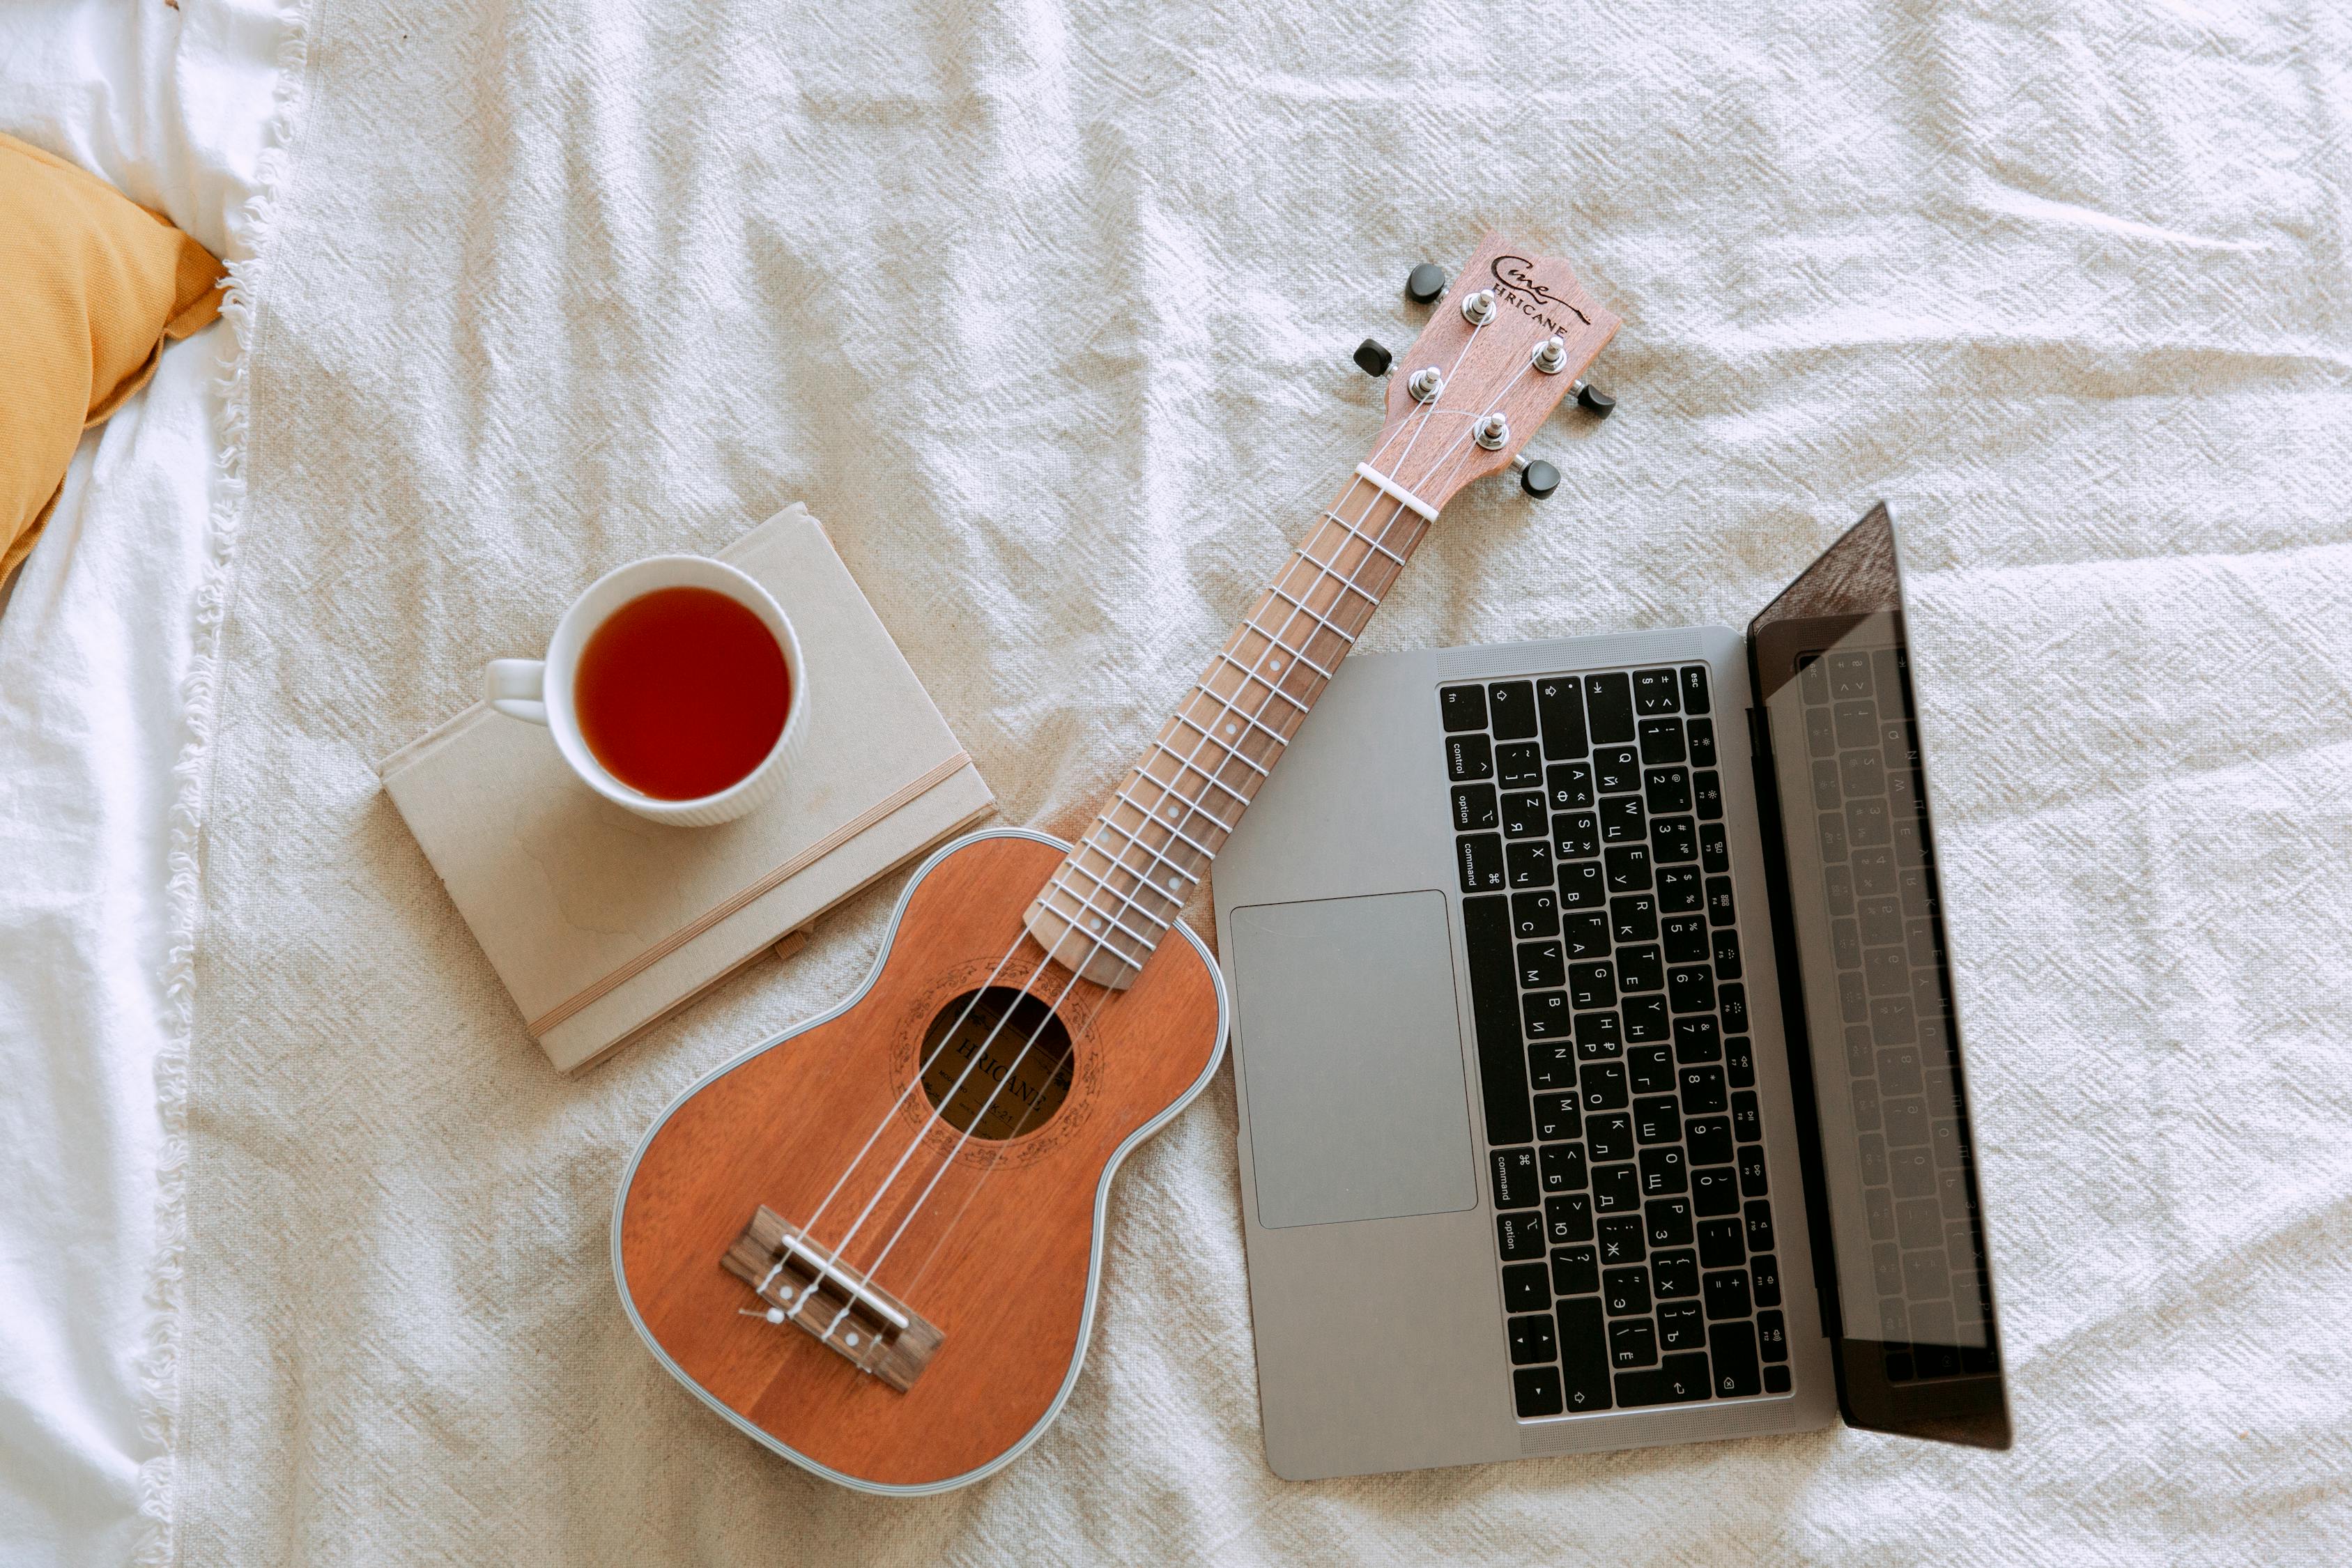 A laptop resting on a bedsheet with a cup of tea and a ukulele